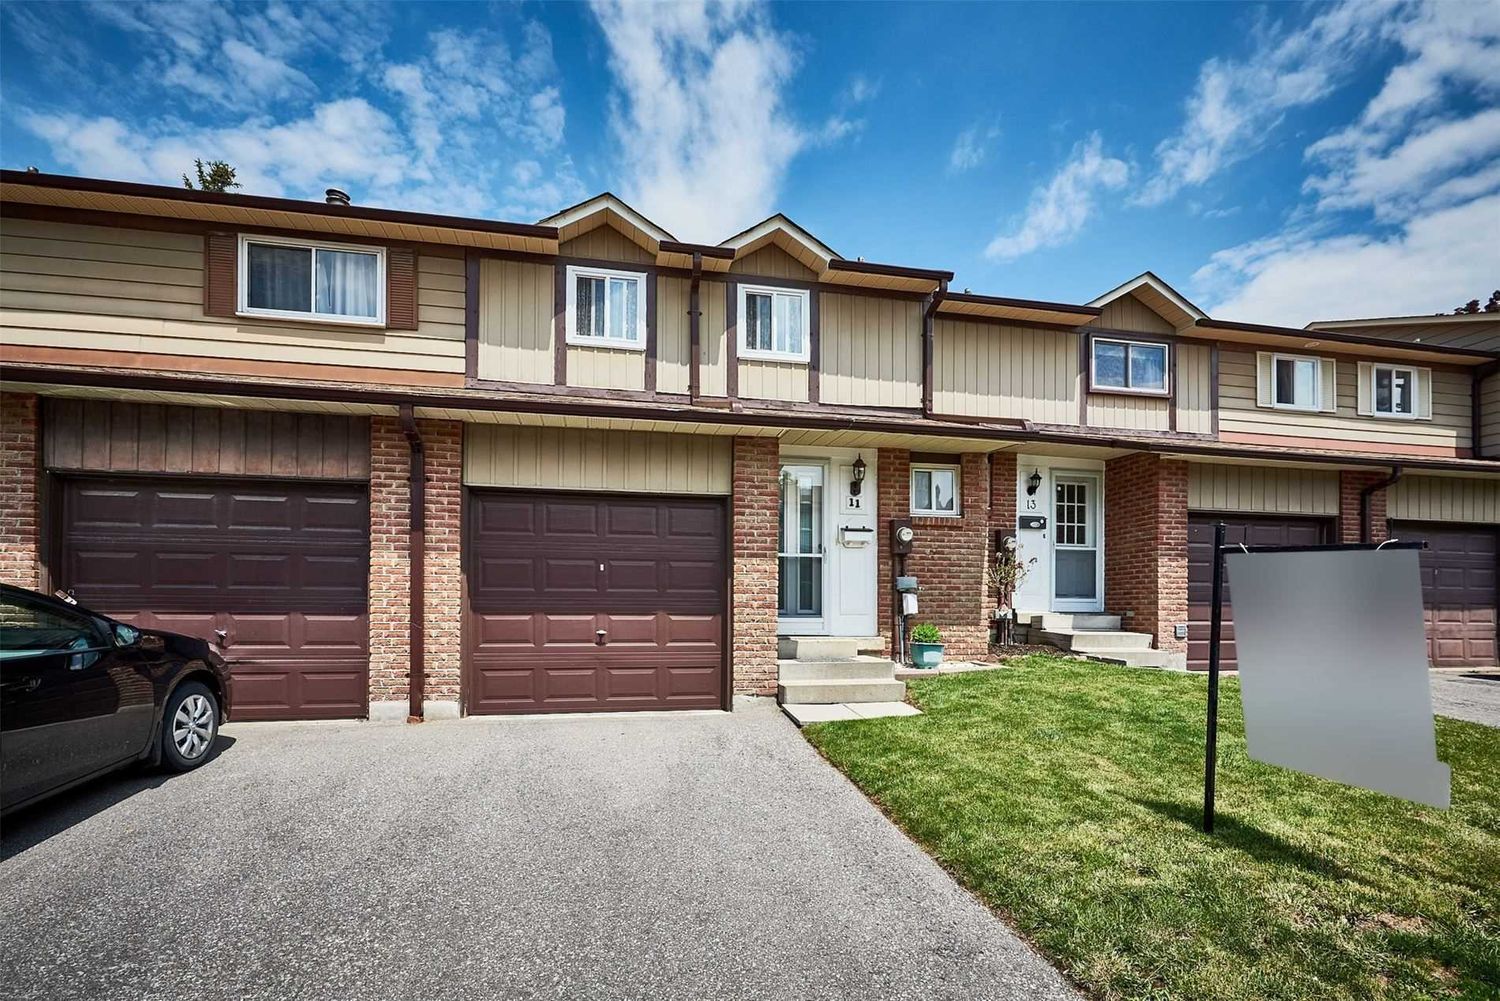 1-100 Parker Crescent. Parker Crescent Townhomes is located in  Ajax, Toronto - image #2 of 2